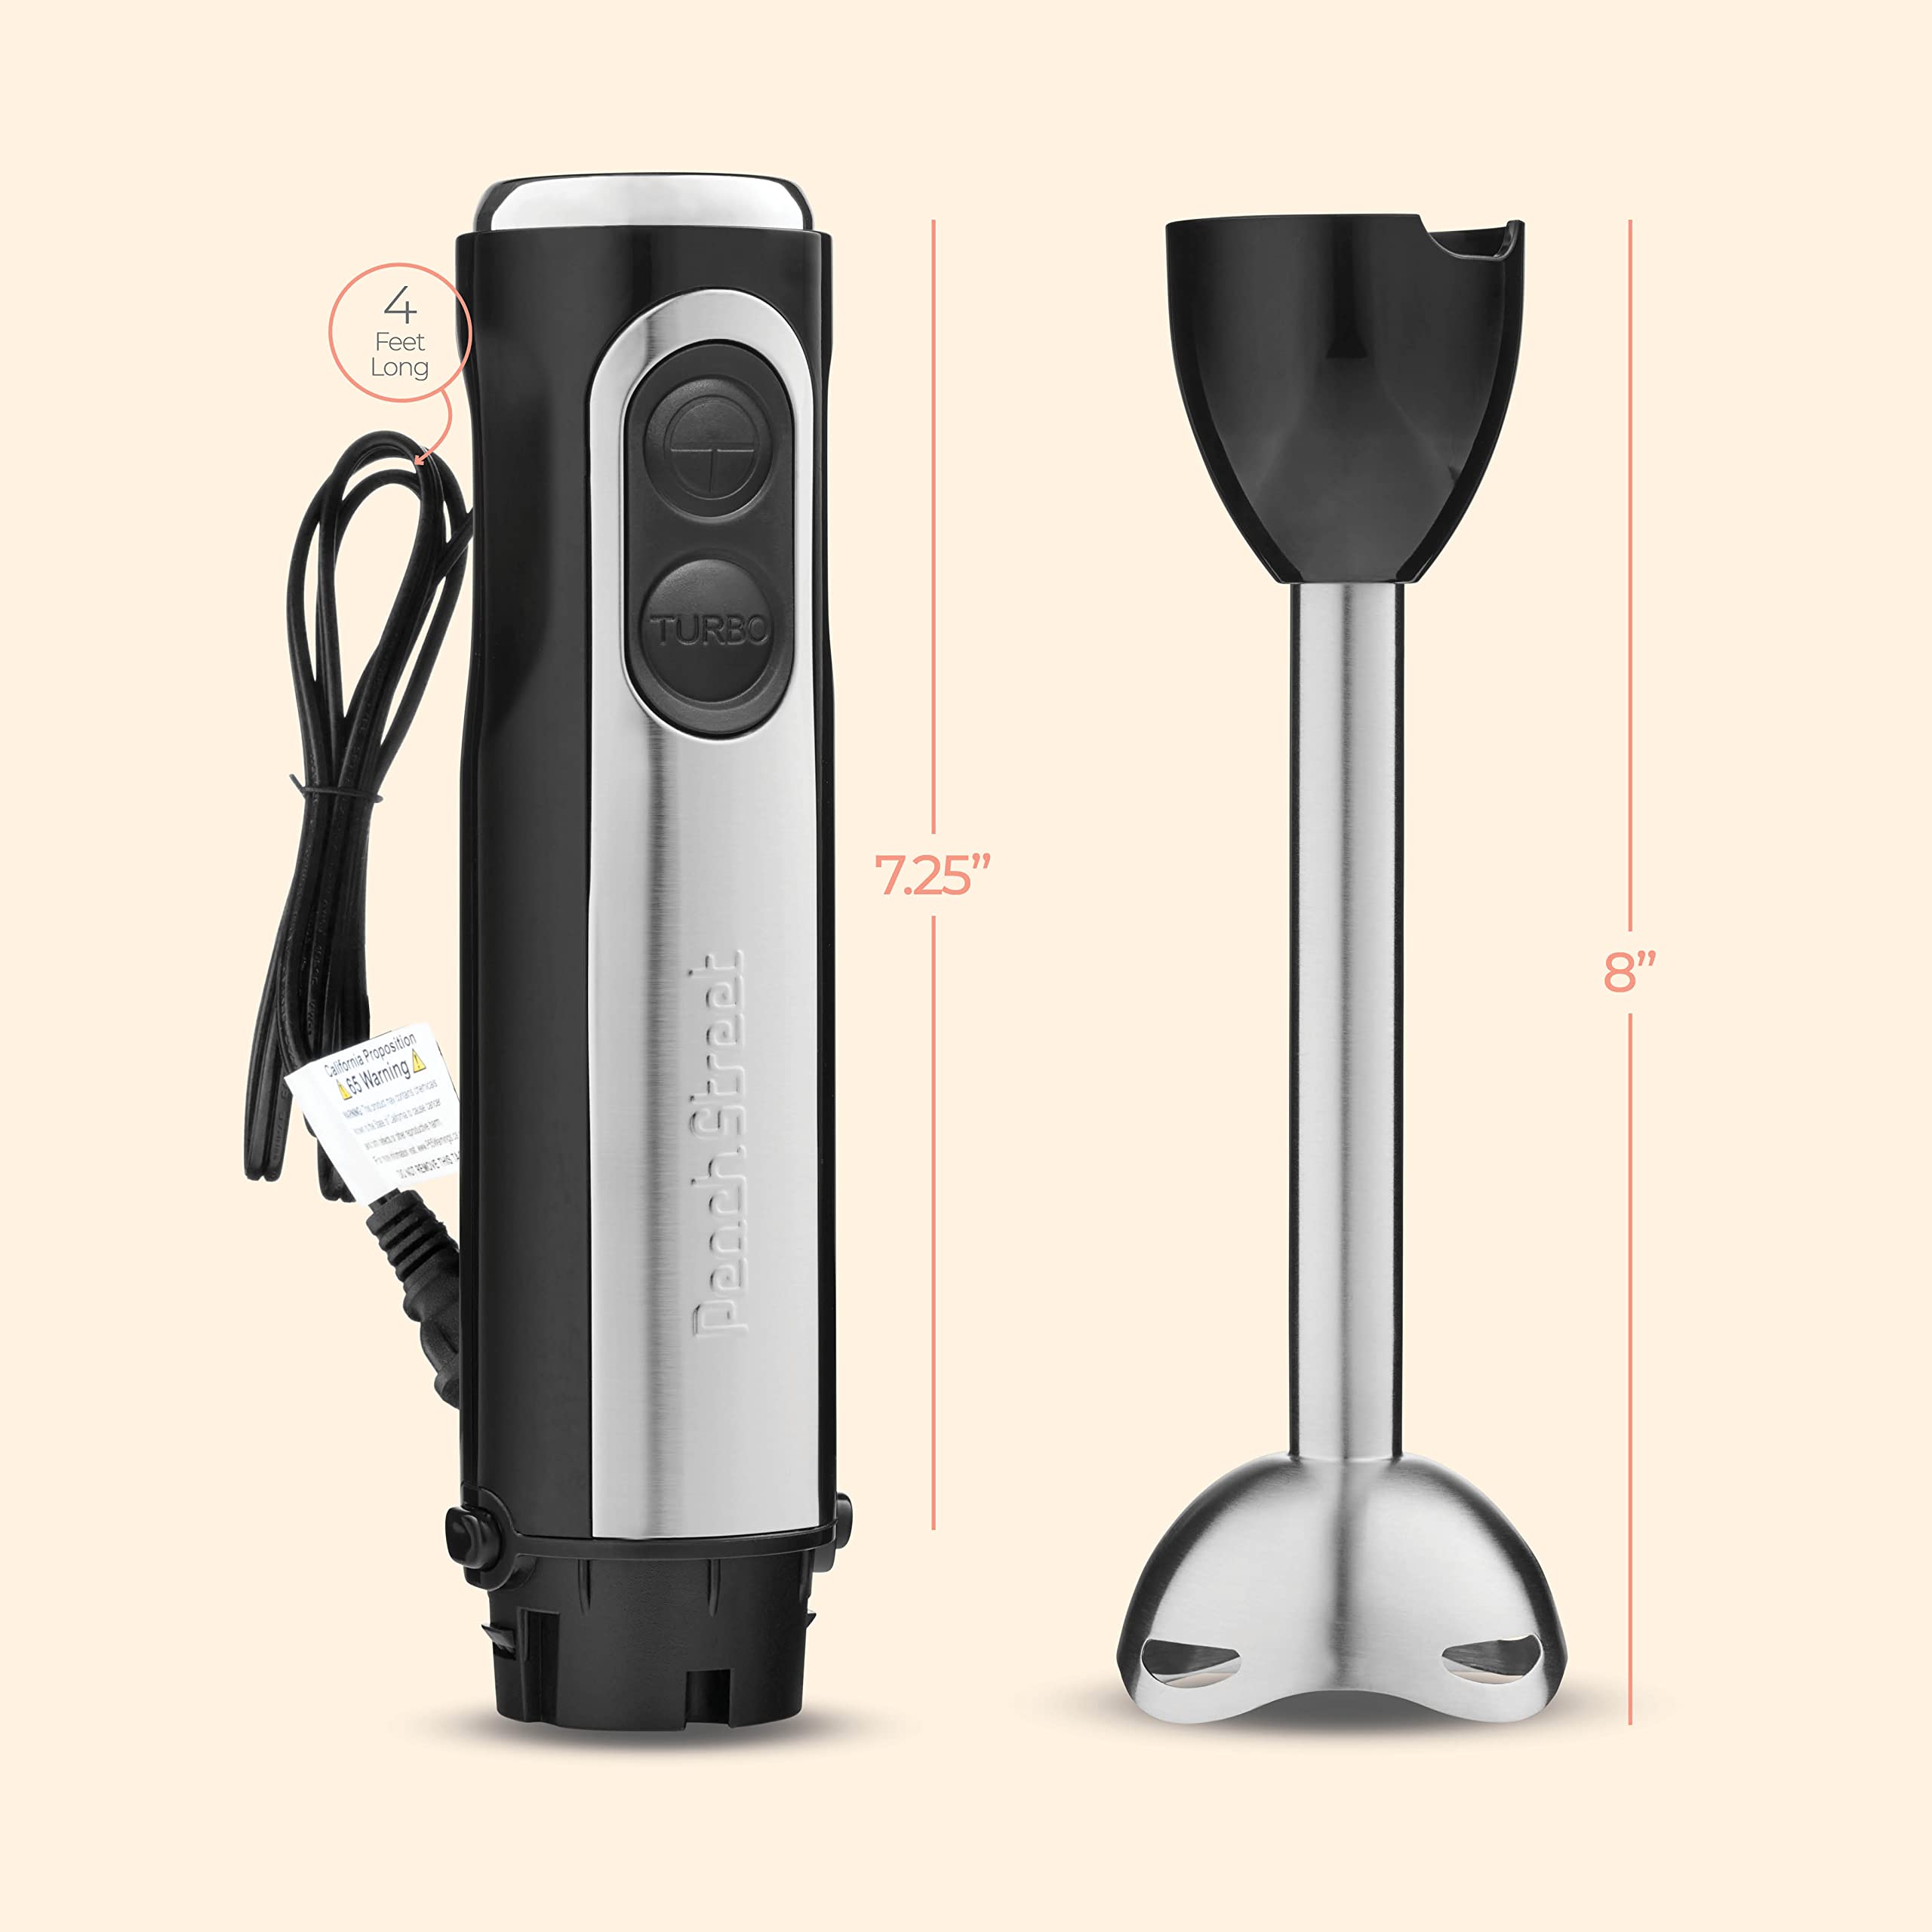 Powerful Immersion Blender, Electric Hand Blender 500 Watt with Turbo Mode, Detachable Base. Handheld Kitchen Gadget Blender Stick for Soup, Smoothie, Puree, Baby Food, 304 Stainless Steel Blades (Black)